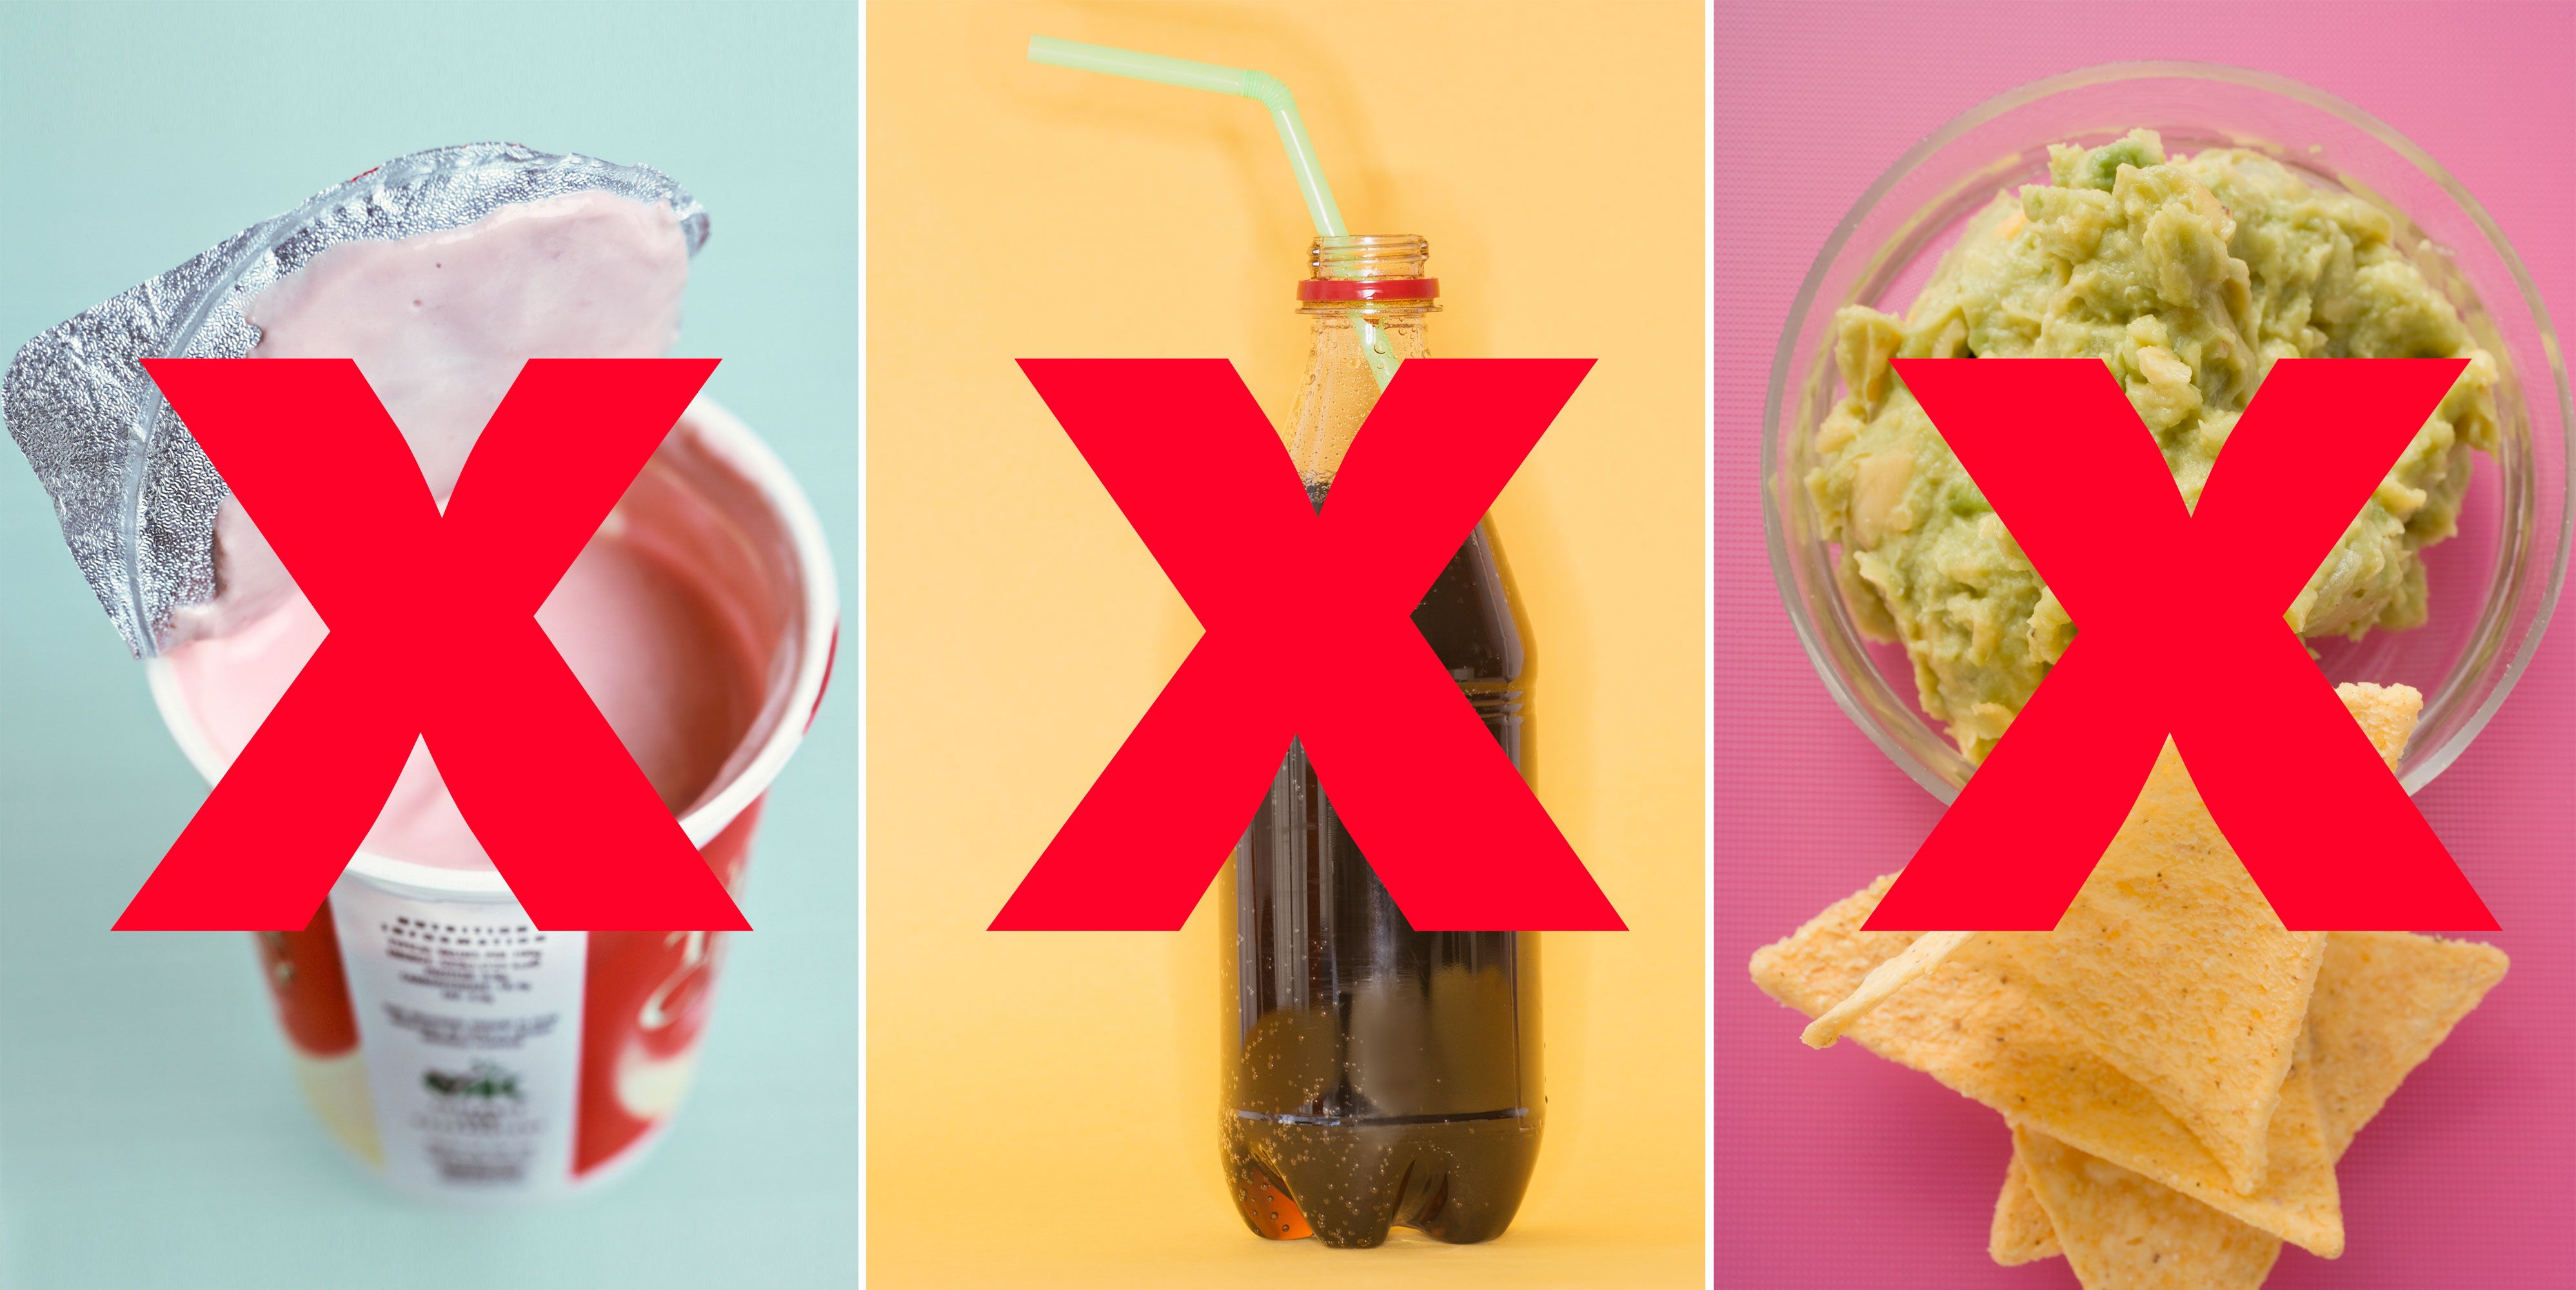 11 Ultra-Processed Foods to Avoid and 22 Healthier Swaps